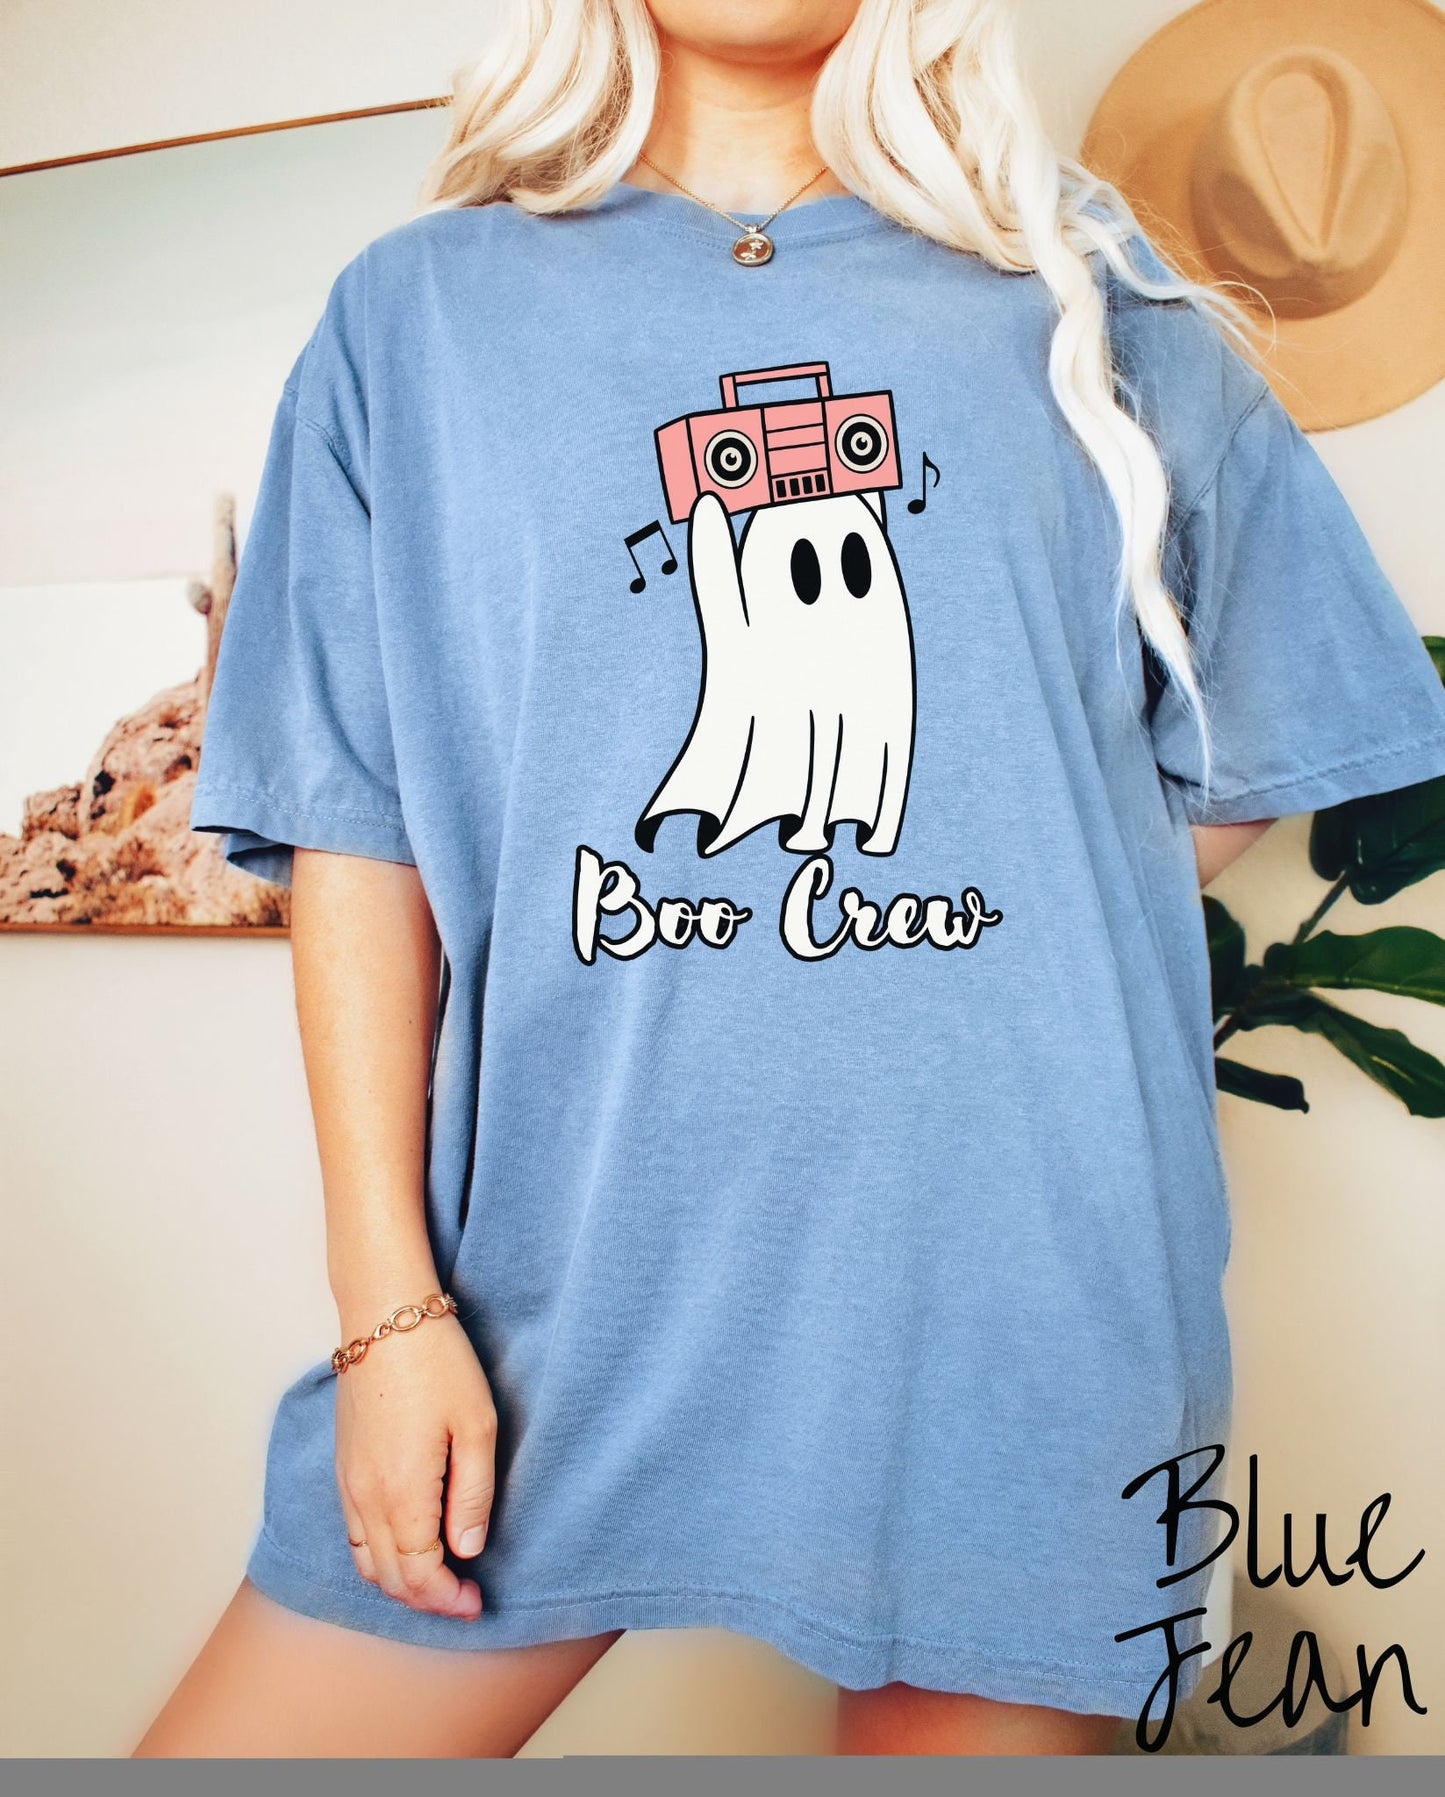 A woman wearing a cute blue jean colored shirt with the text Boo Crew under a ghost figure holding a camera.